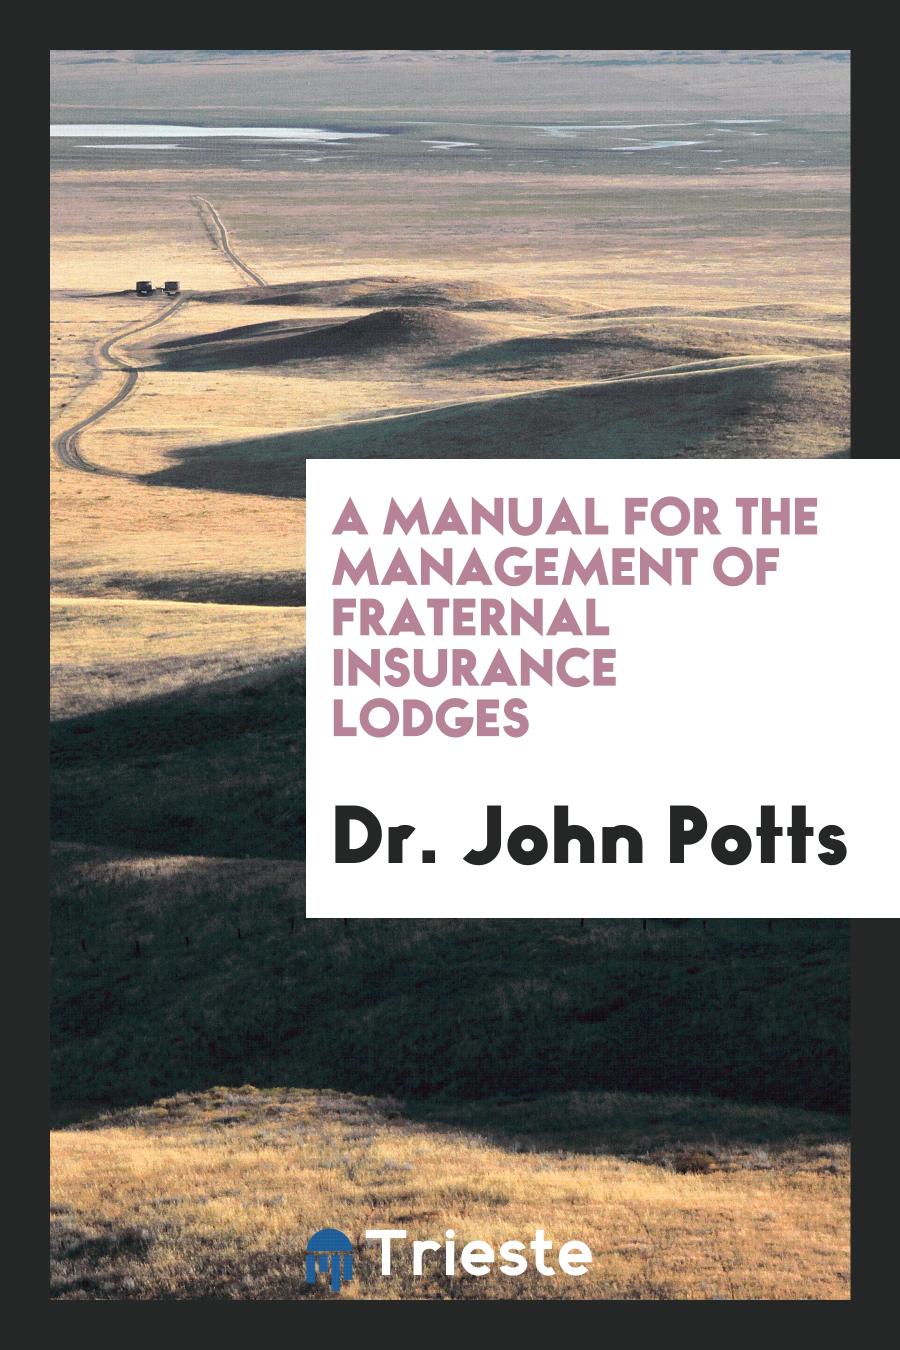 A Manual for the Management of Fraternal Insurance Lodges